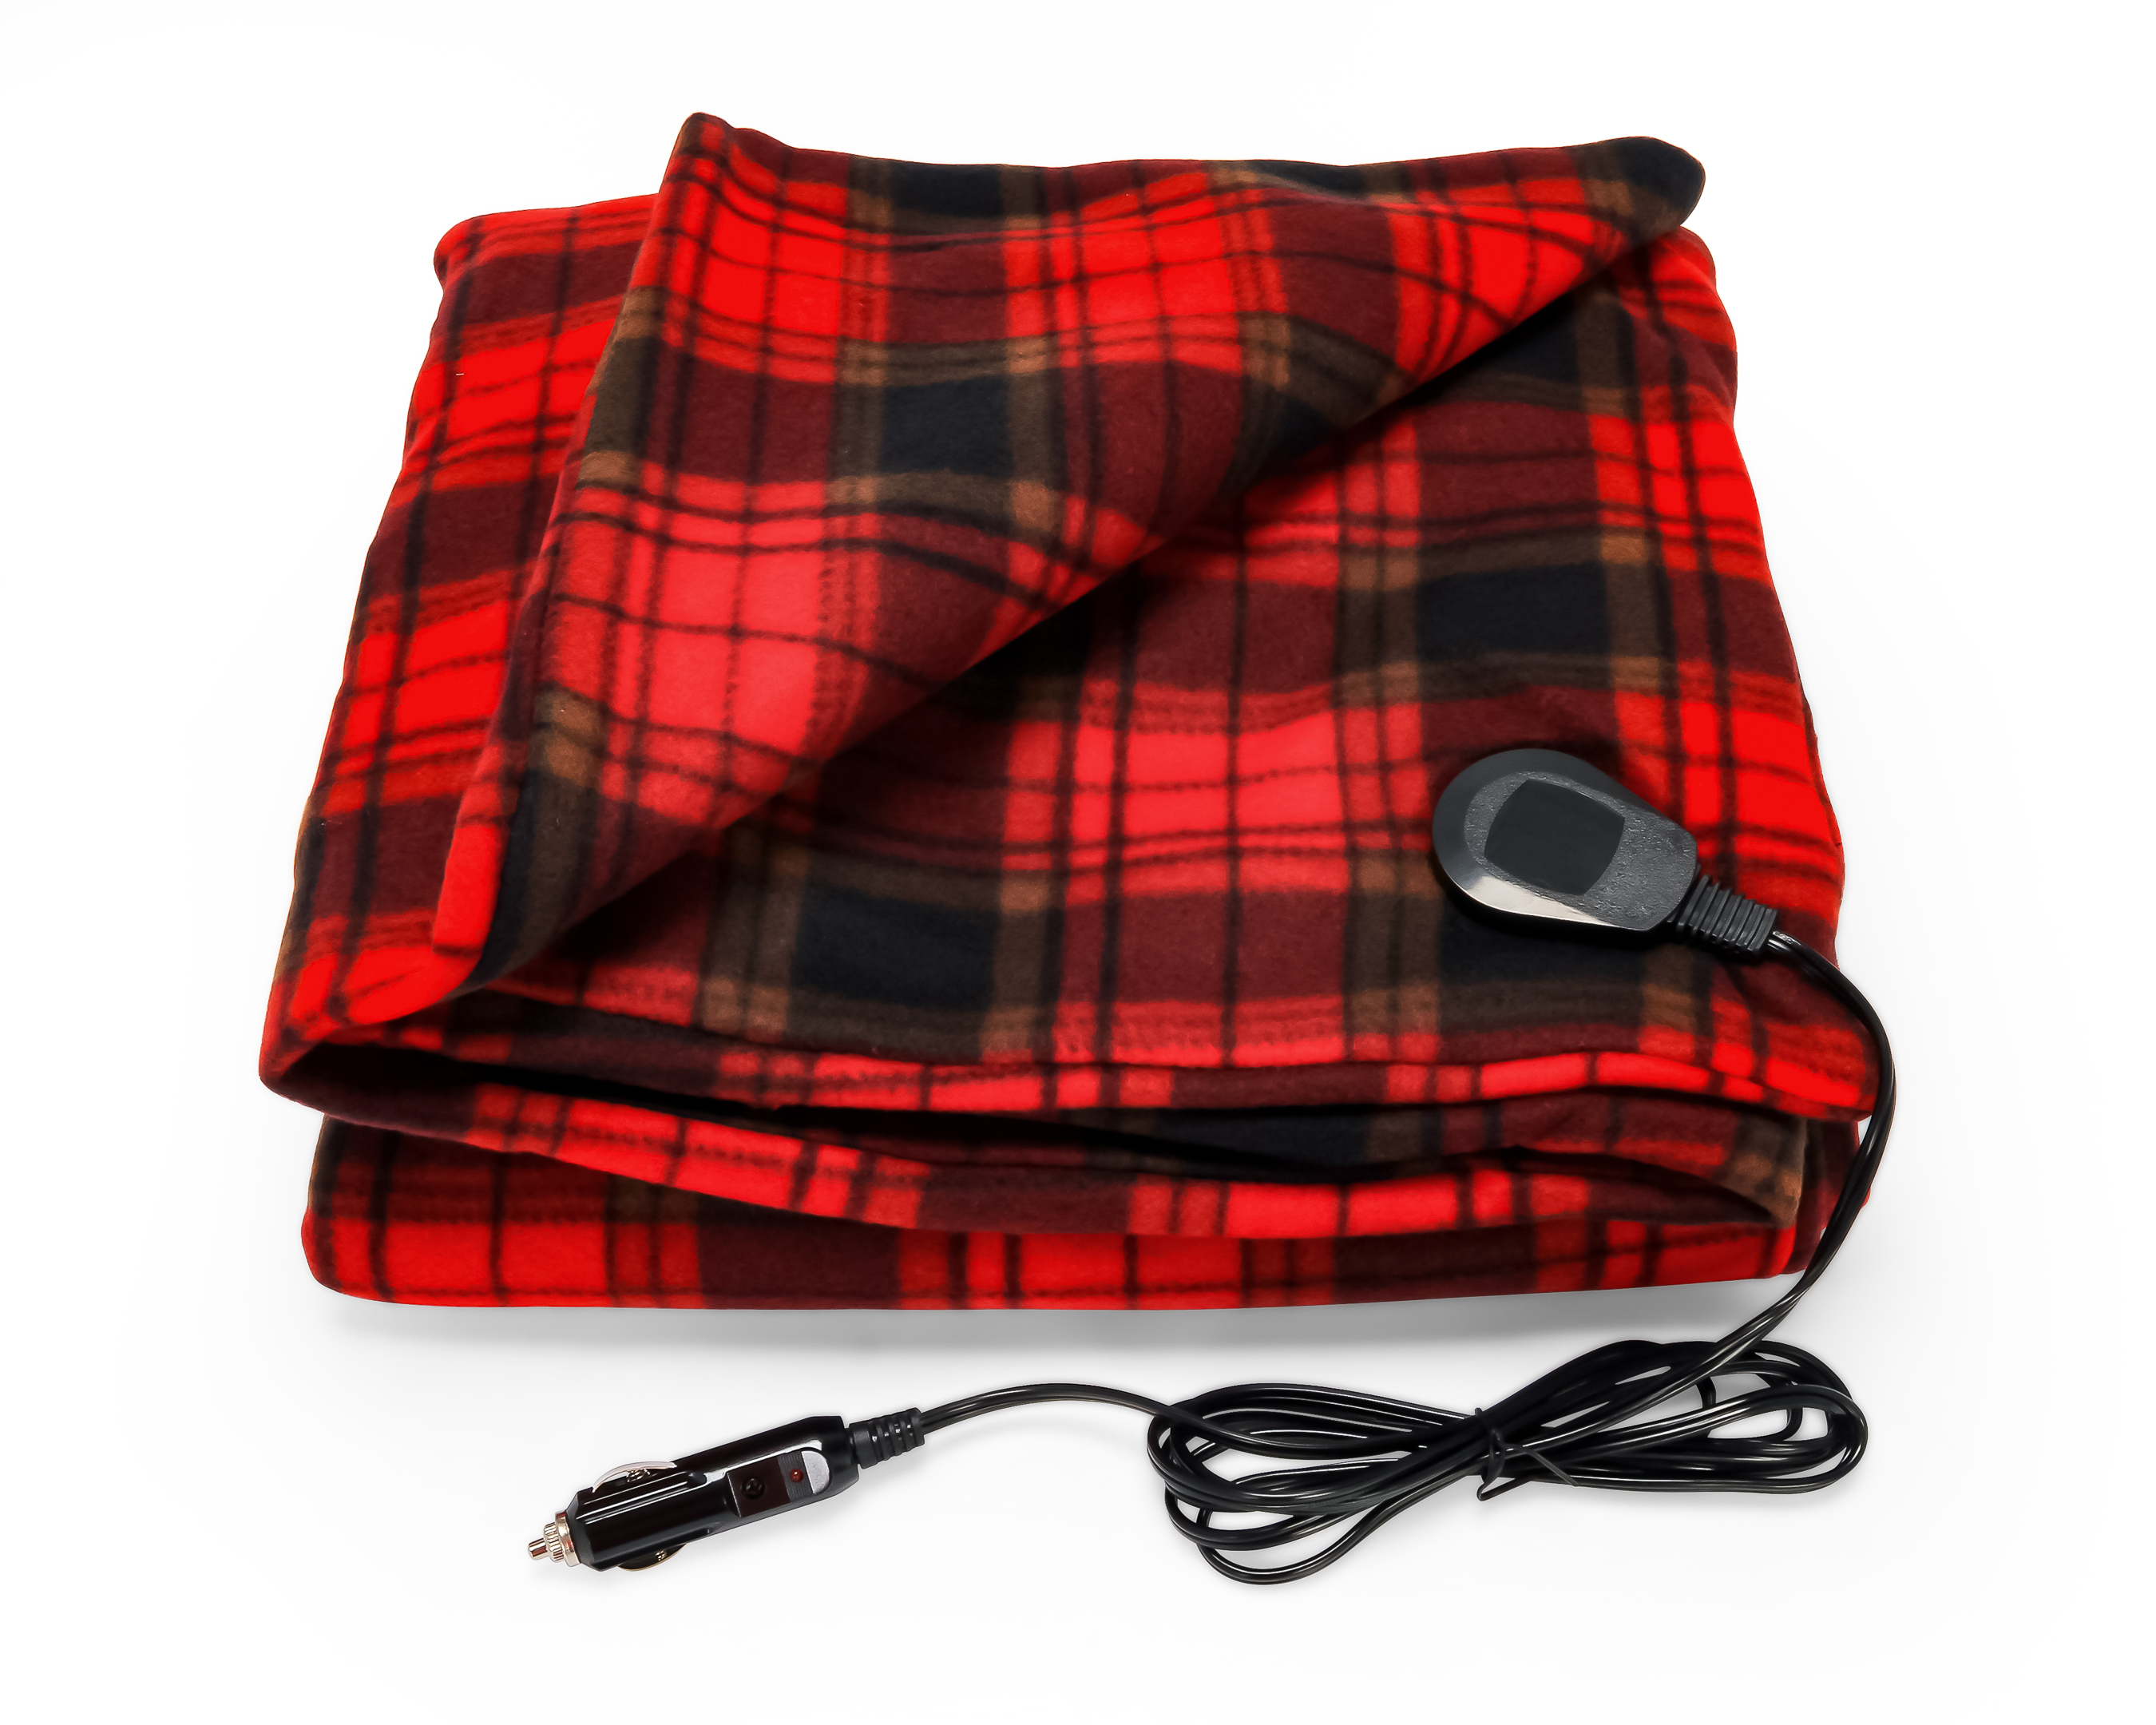 Camco Heated Blanket for RVs, Camping, Traveling, and More | Ideal for Cold Nights, Relieving Aches and Pain | 100% Polar Fleece | Red/Black Plaid (42804) - image 1 of 7